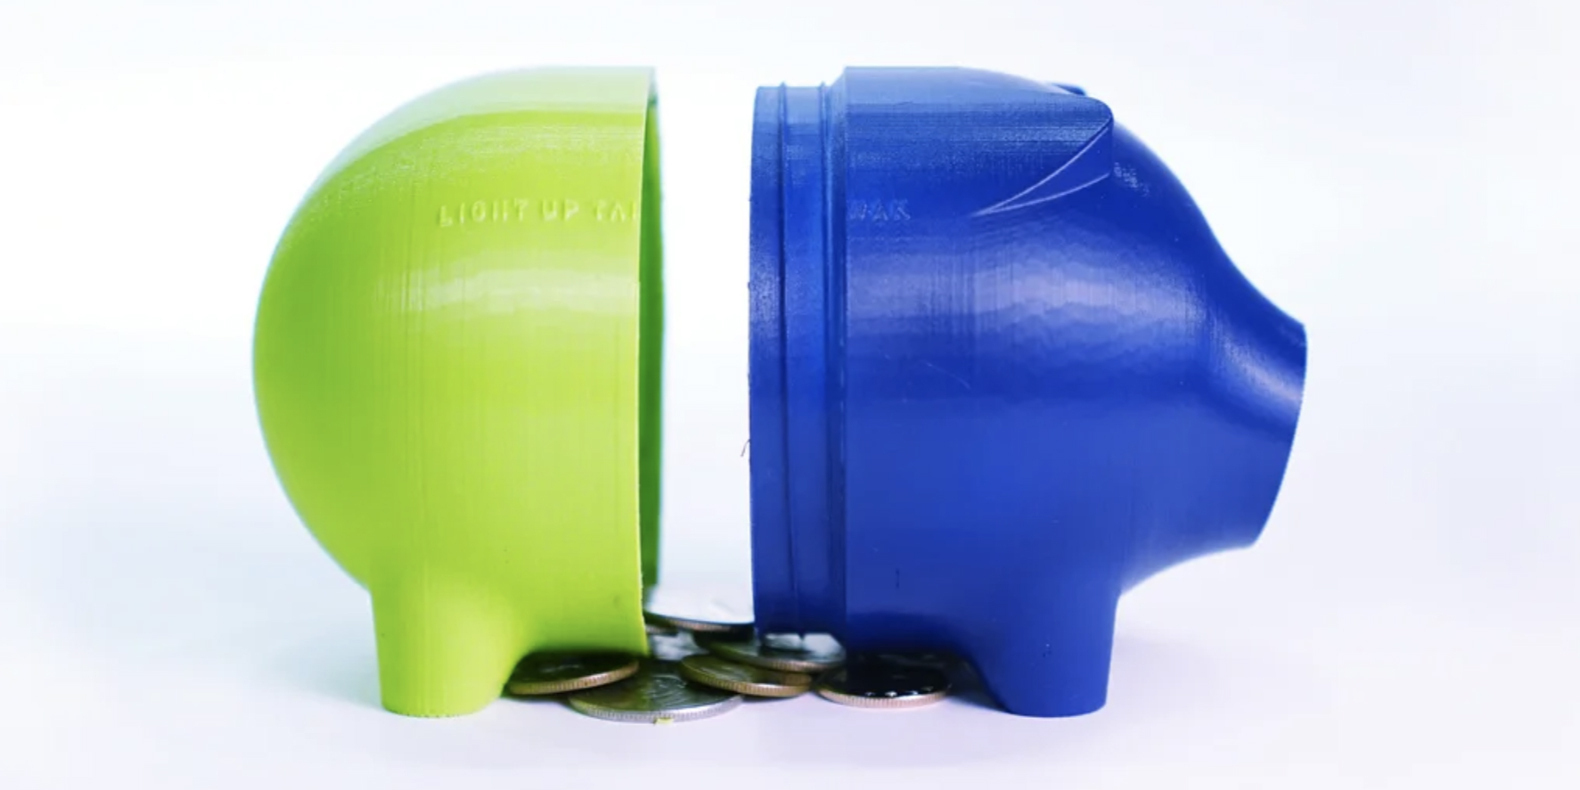 Here is a selection of the best piggy bank 3D models to make with a 3D printer